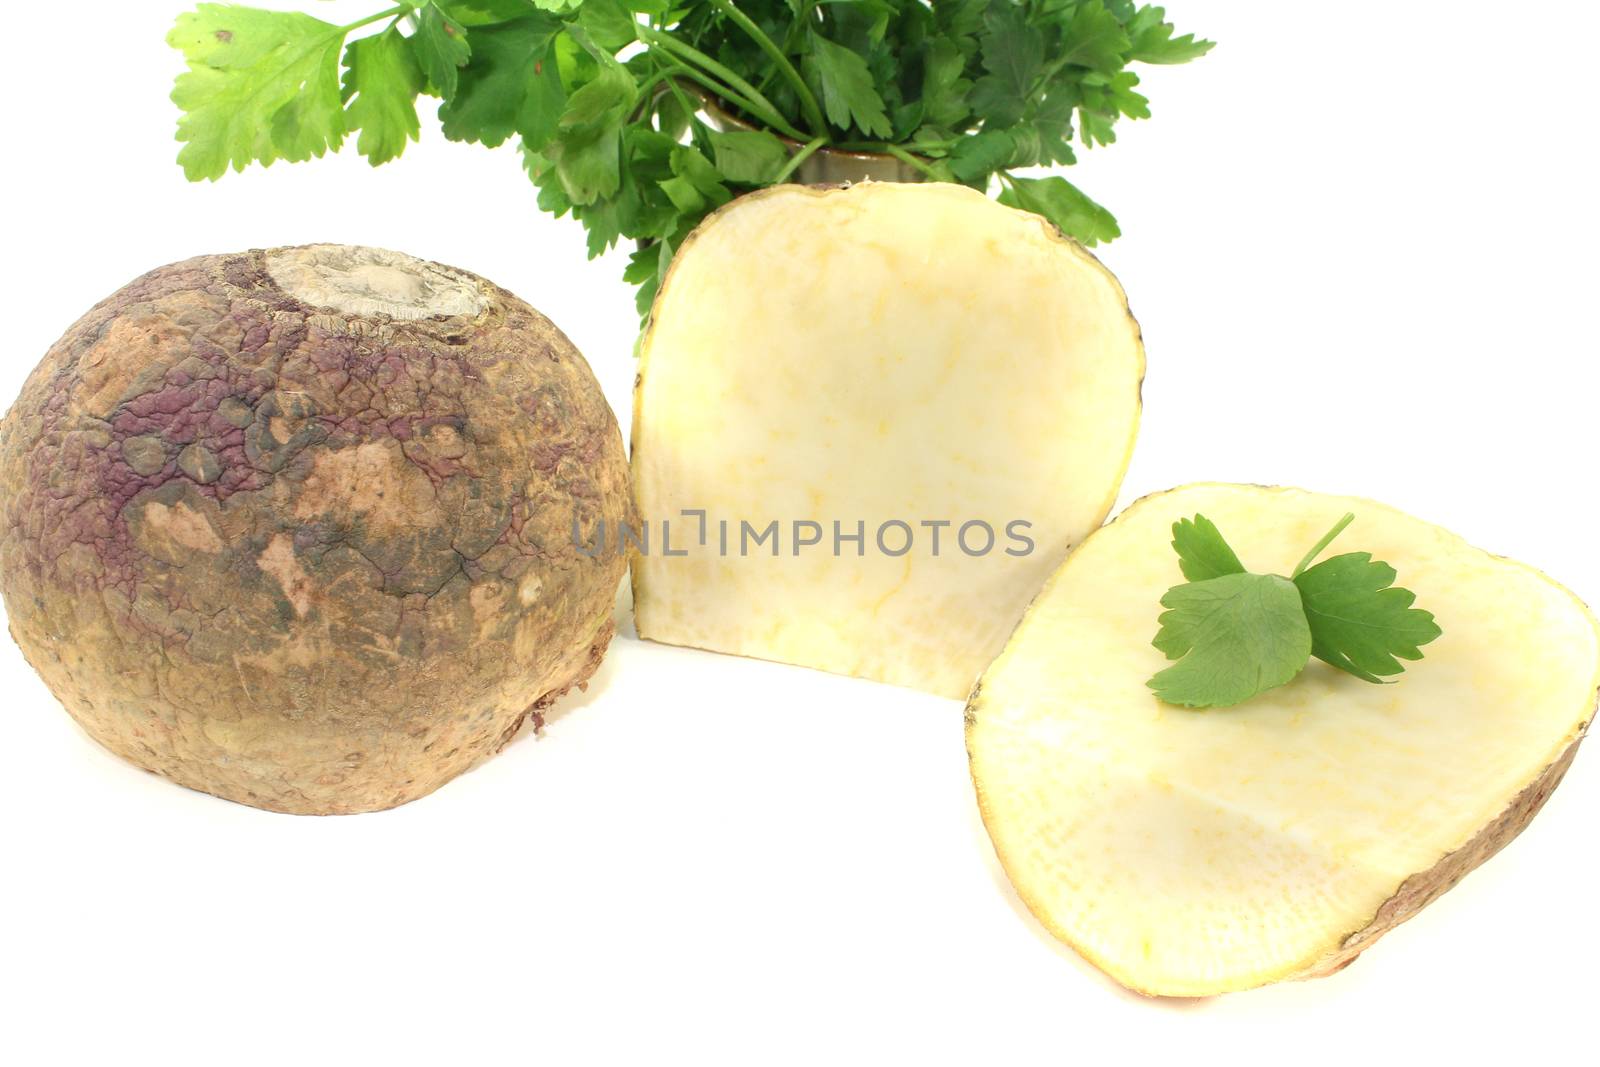 two yellow rutabaga with parsley and napkin on a light background